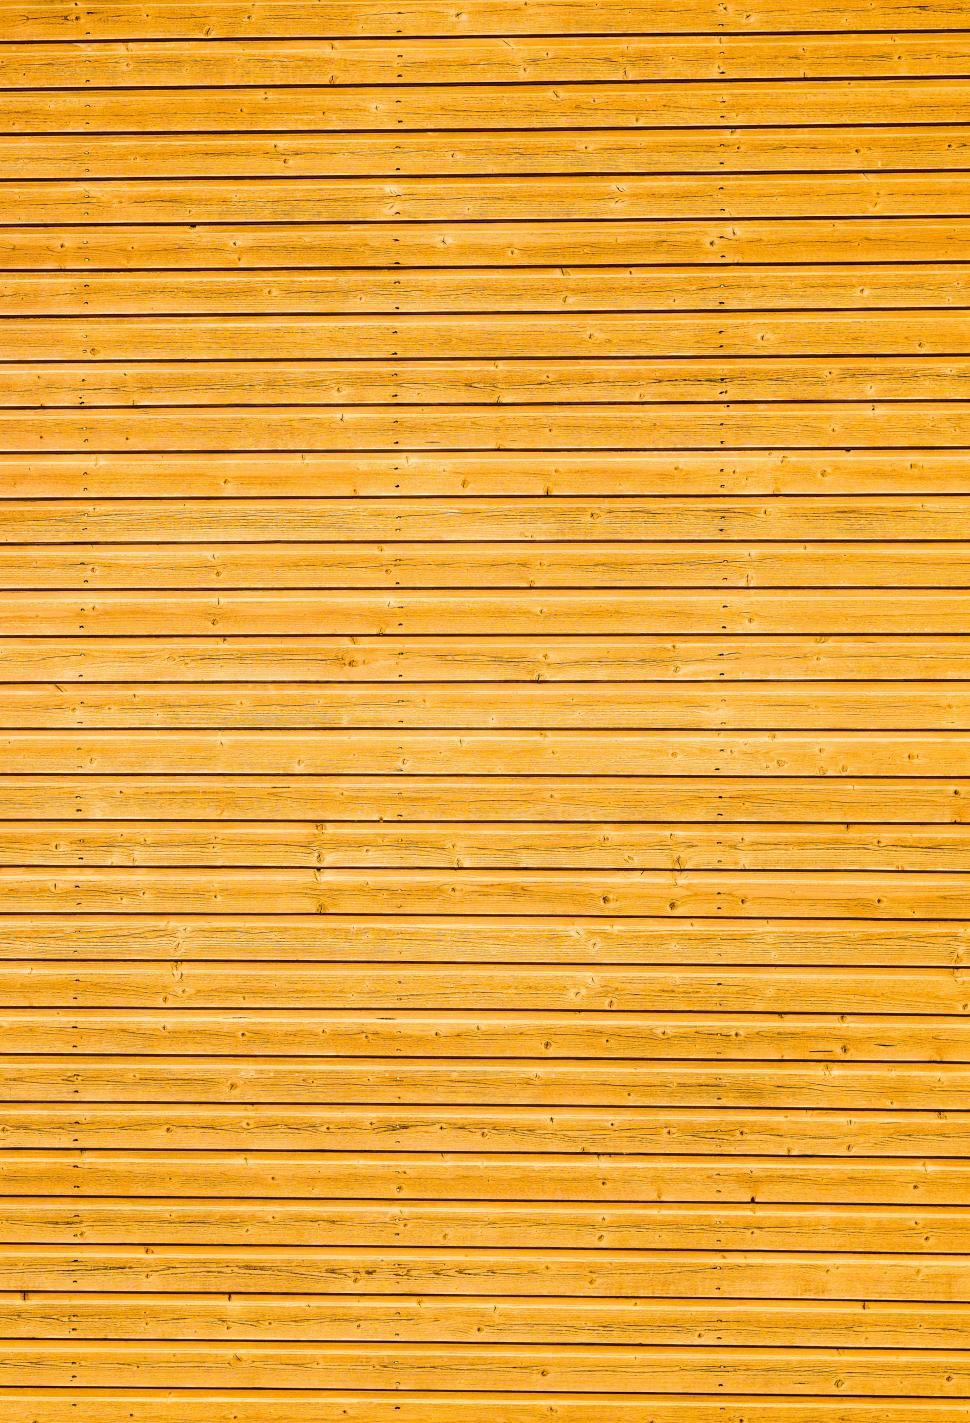 Horizontal Wood Plank Texture Picture, Free Photograph